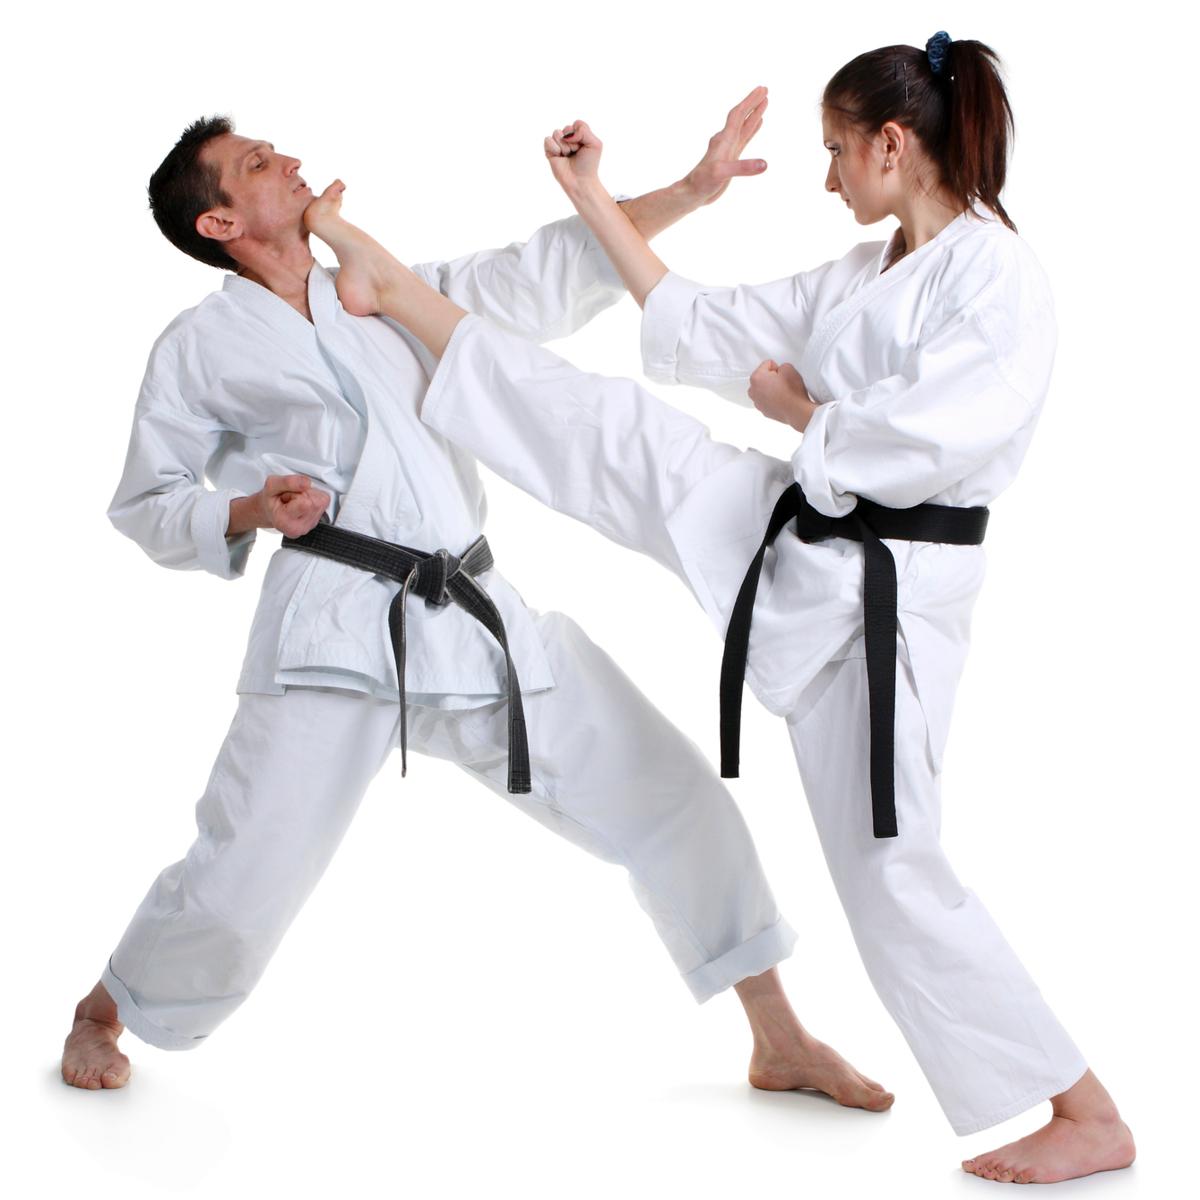 Self Defence Training - Basic Facts And Tips 2